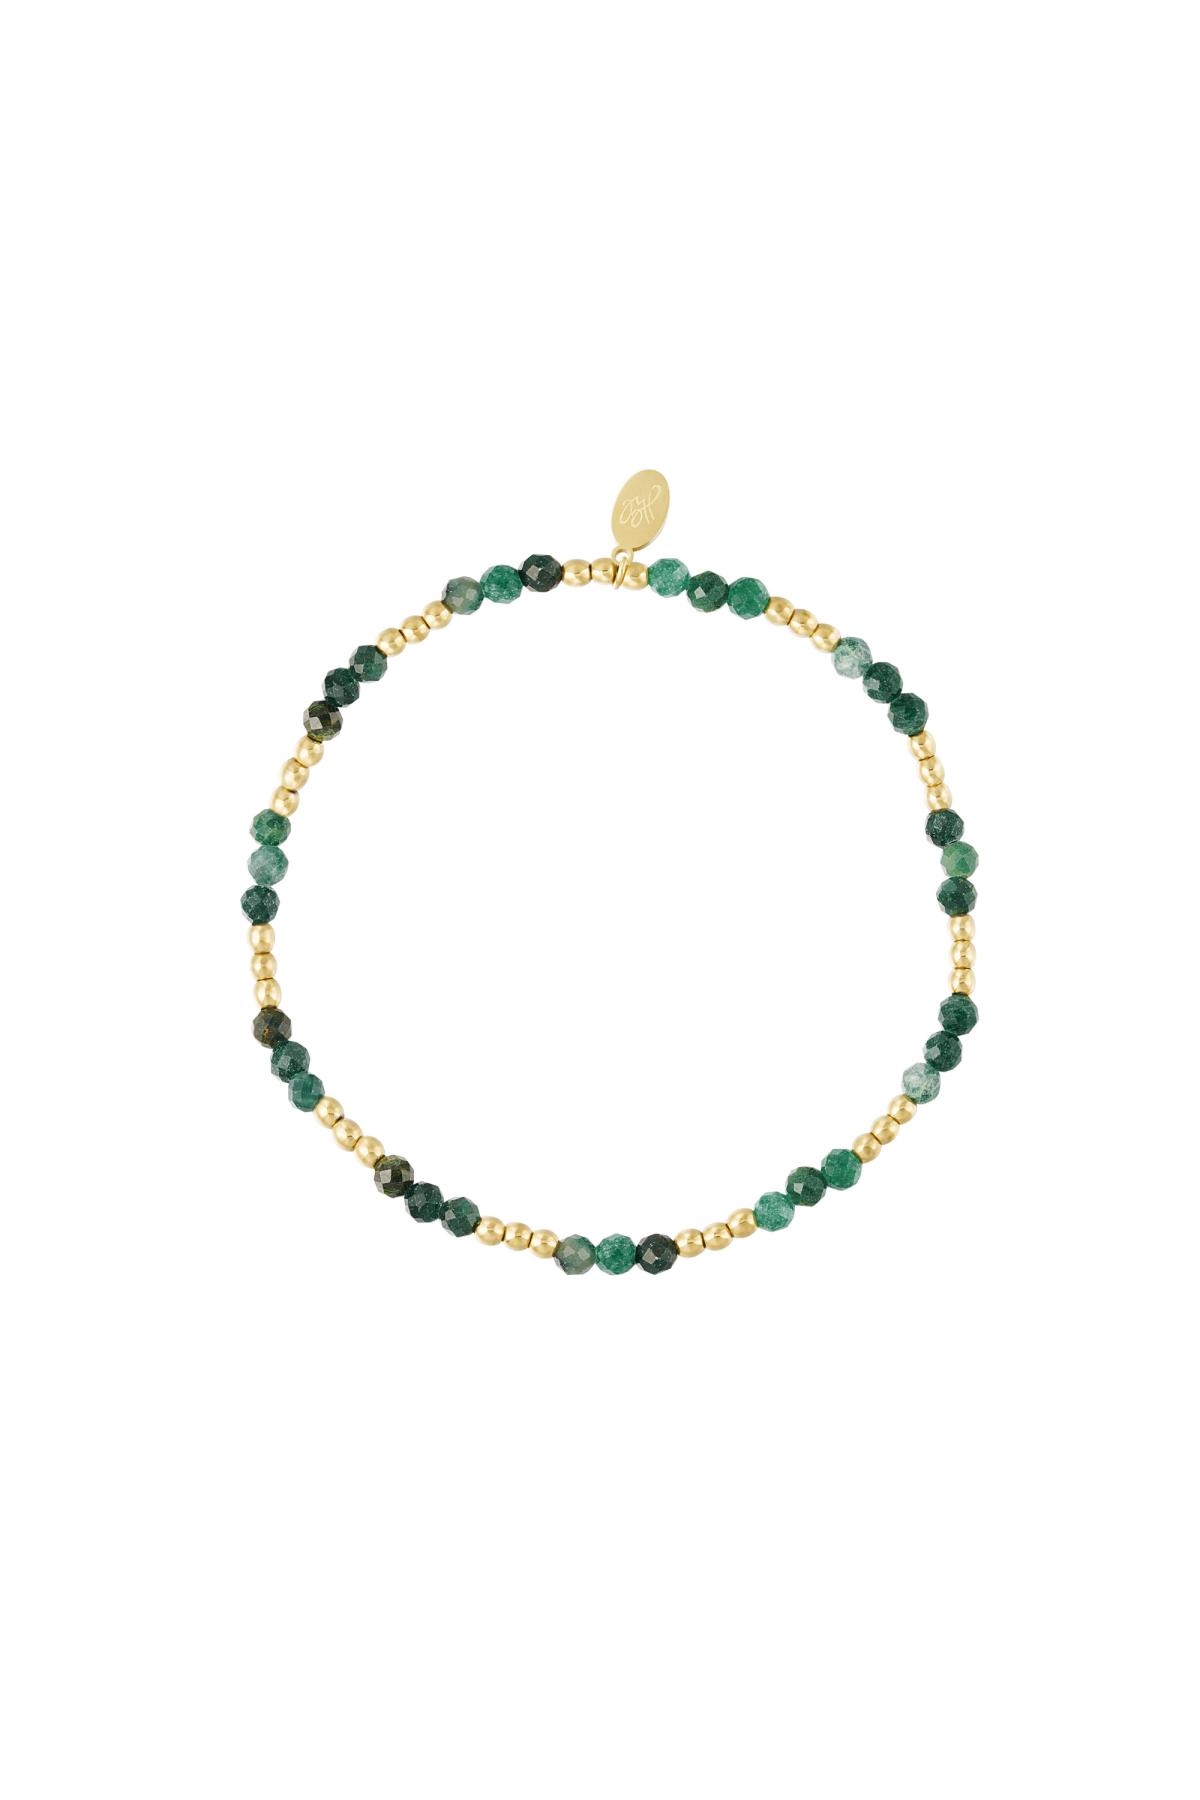 Beaded bracelet colorful - Natural stones collection Green &amp; Gold Stainless Steel